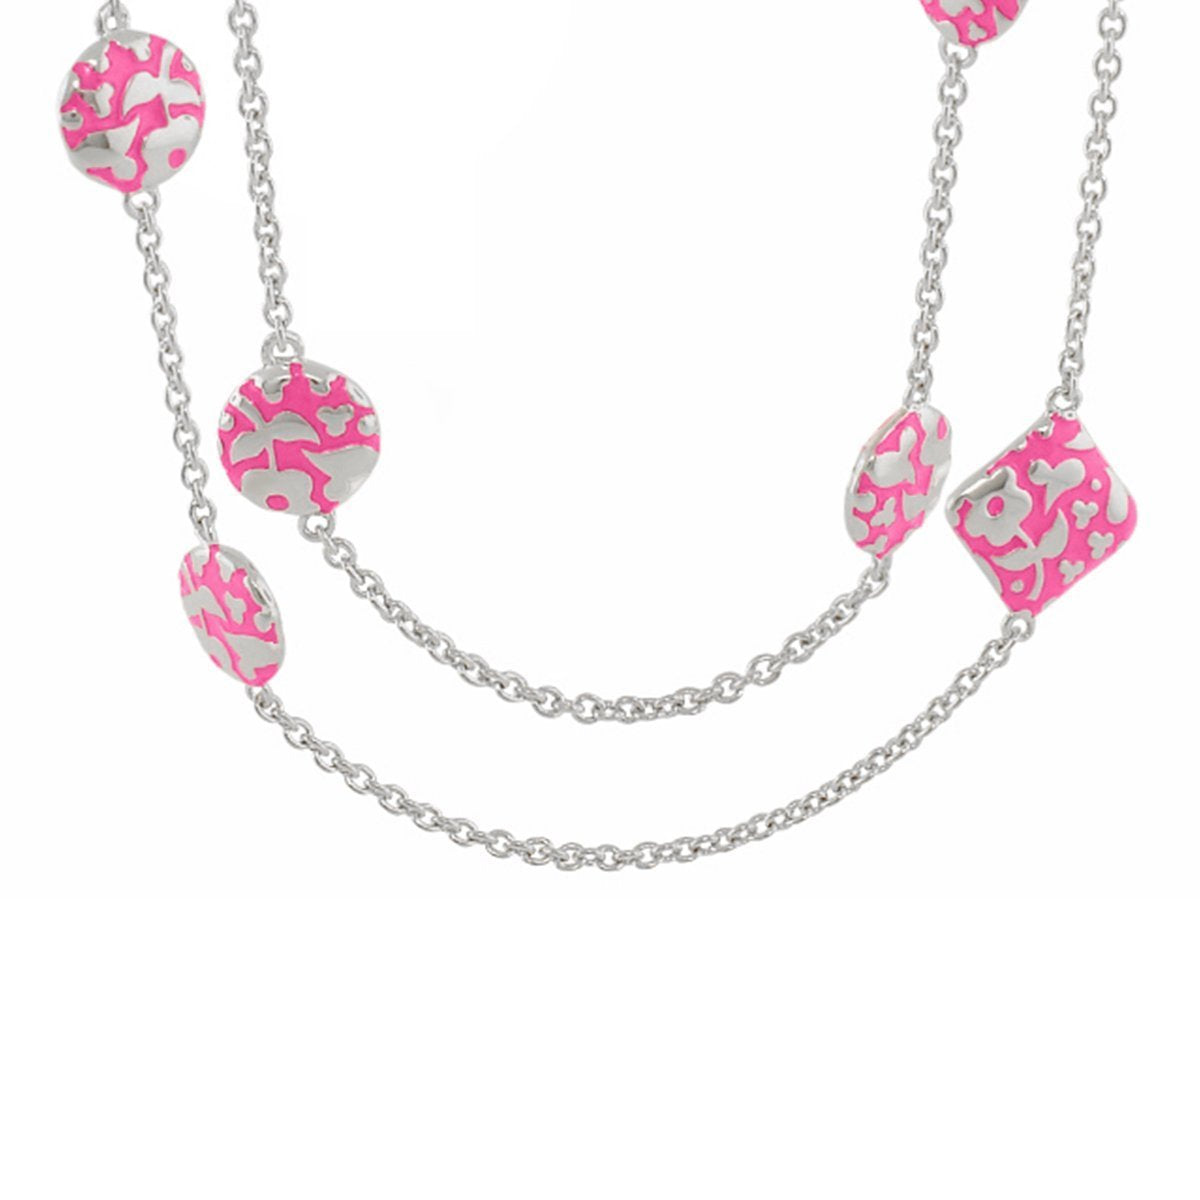 Flowers by Orly Necklace